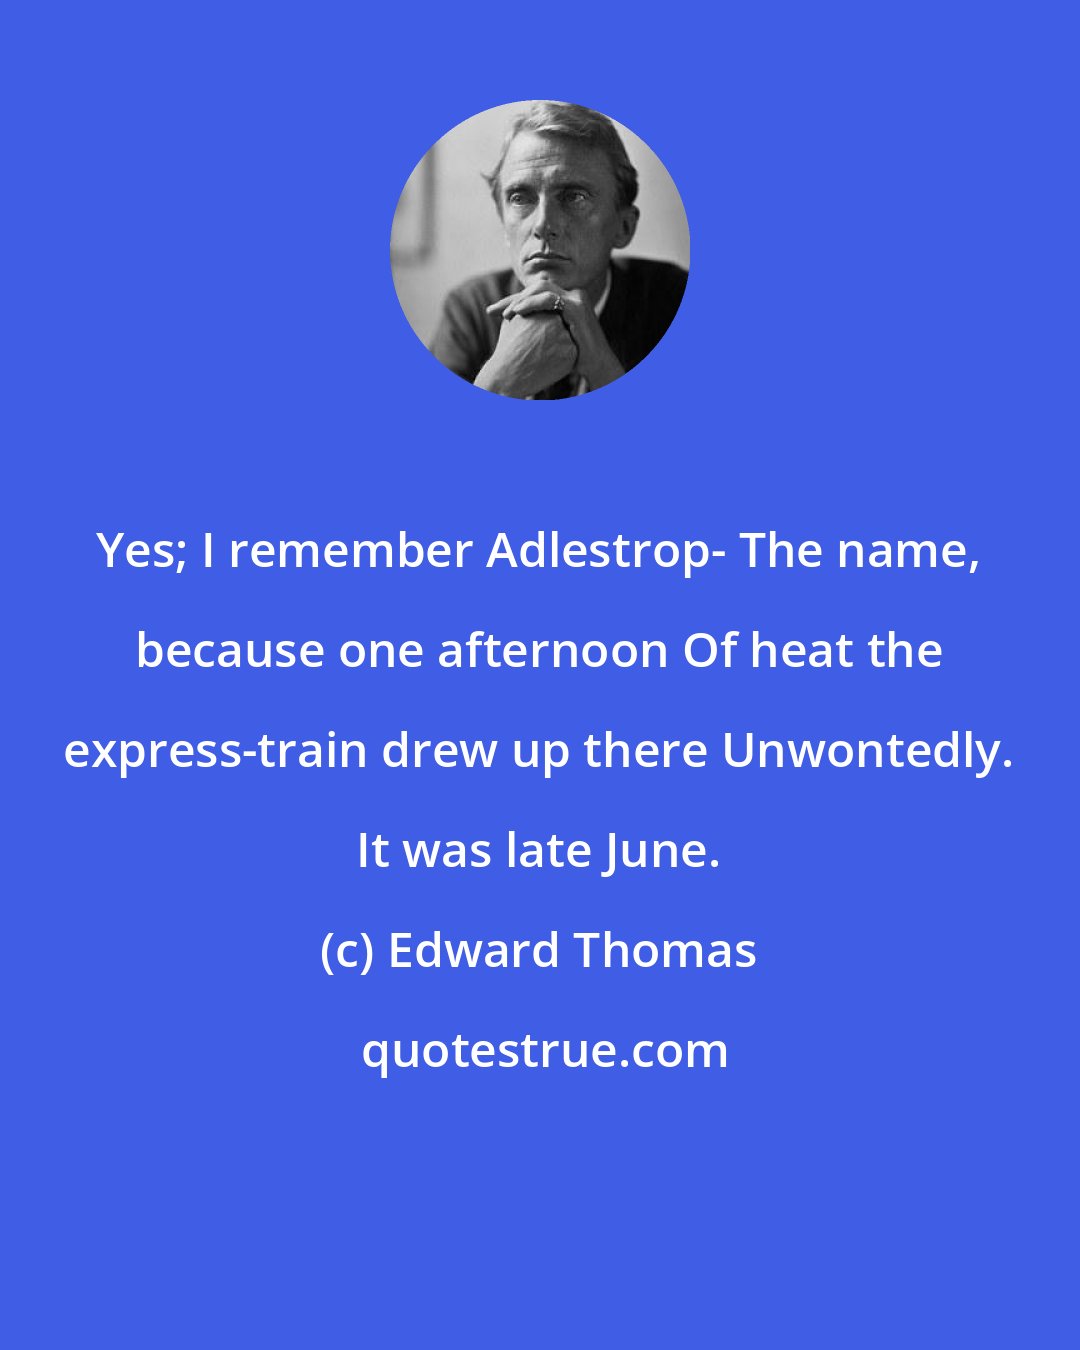 Edward Thomas: Yes; I remember Adlestrop- The name, because one afternoon Of heat the express-train drew up there Unwontedly. It was late June.